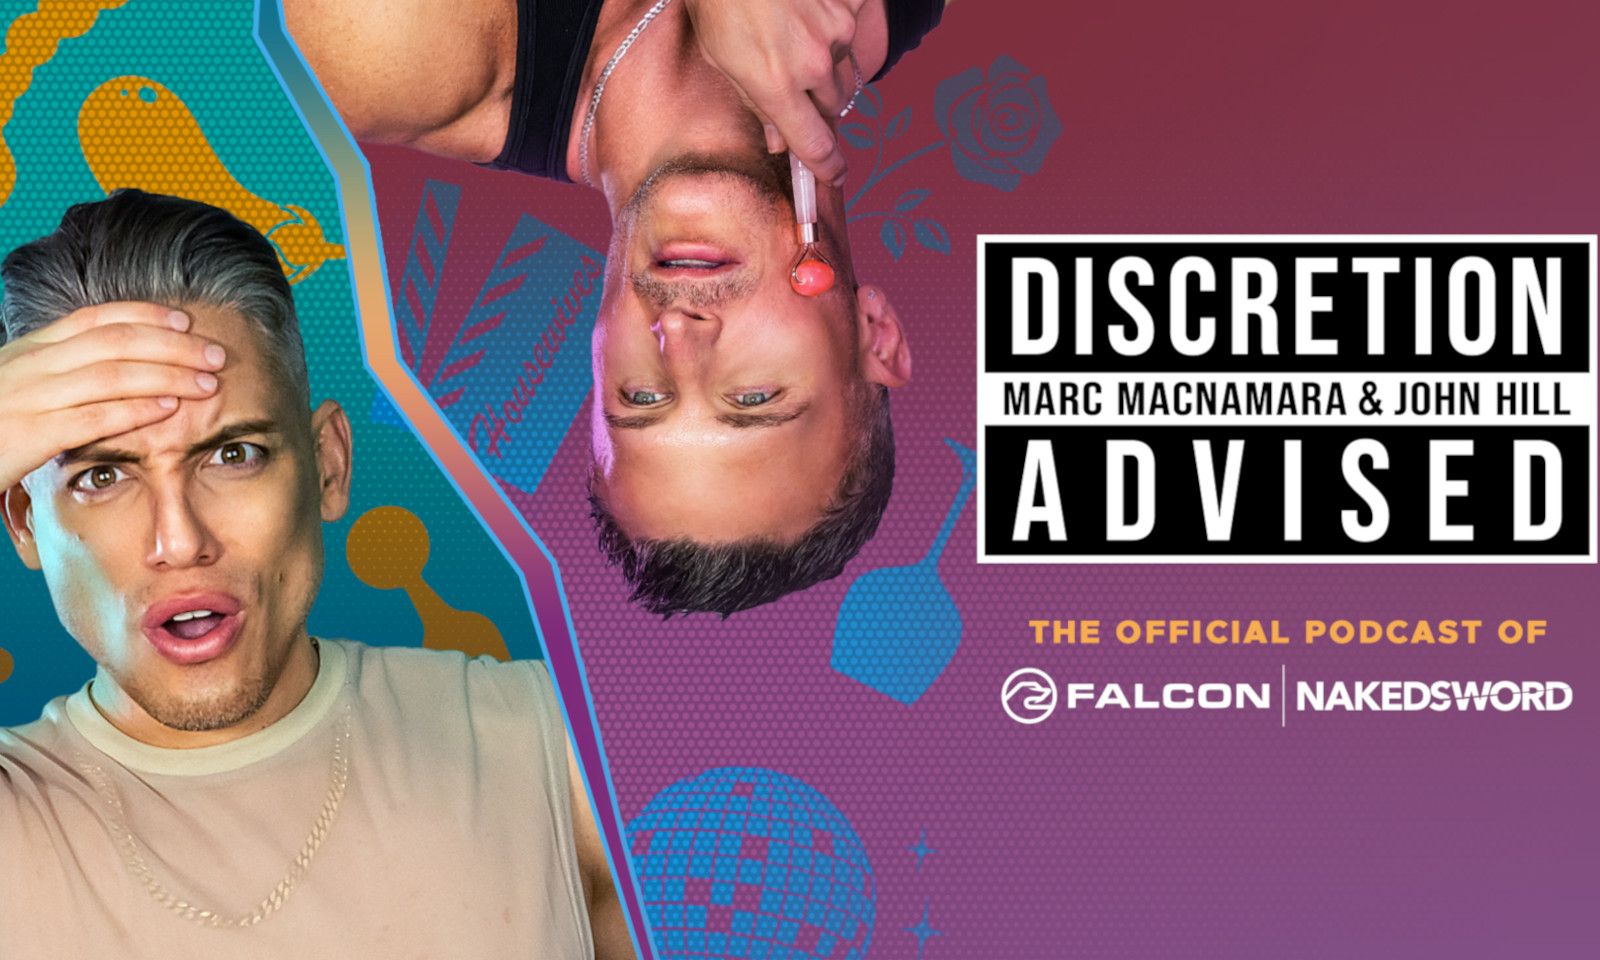 'Discretion Advised' Podcast Returns With Red Carpet Interviews